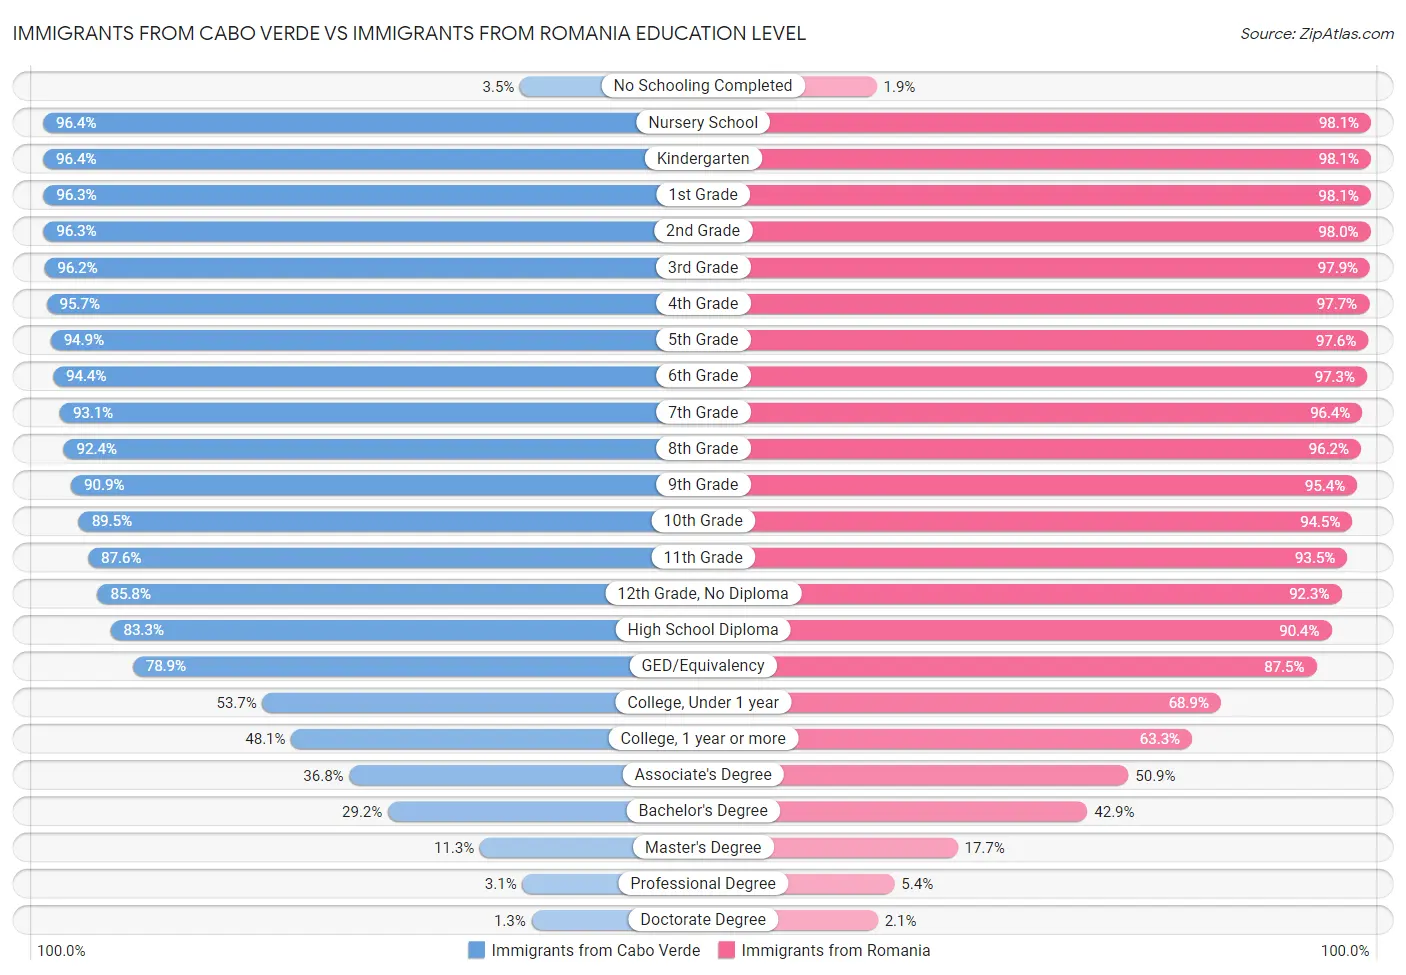 Immigrants from Cabo Verde vs Immigrants from Romania Education Level